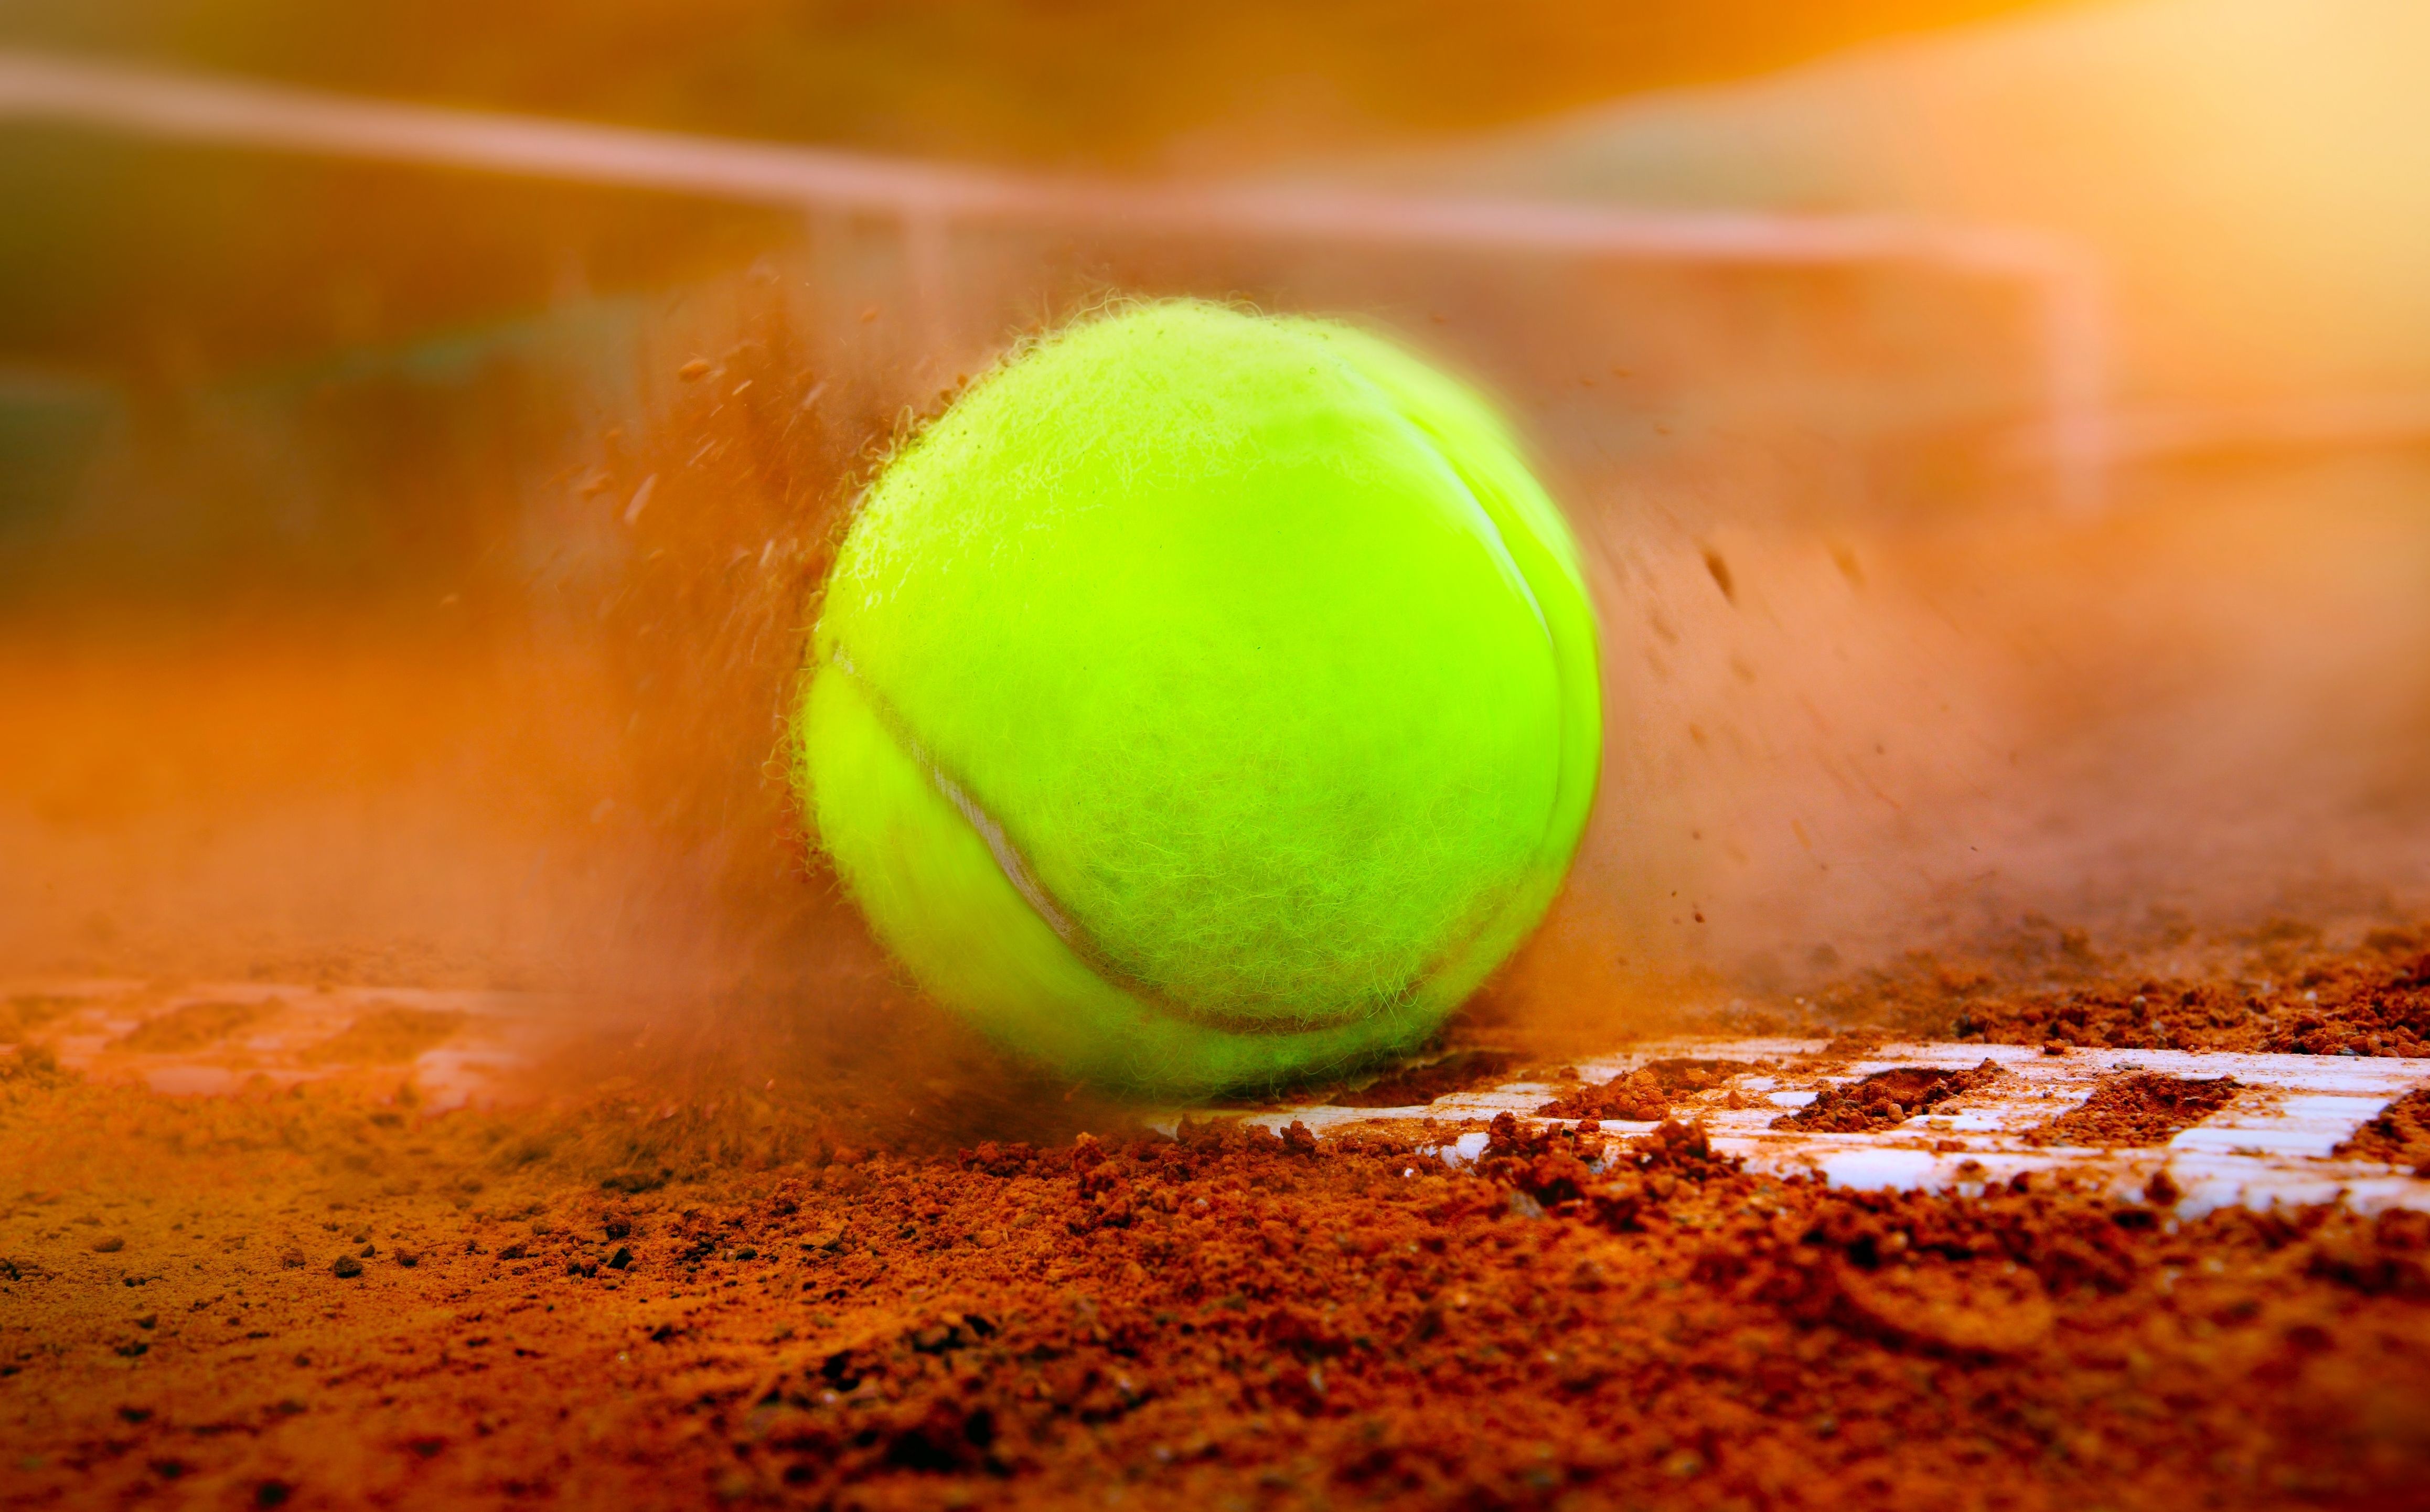 Tennis ball hit the clay court in close up